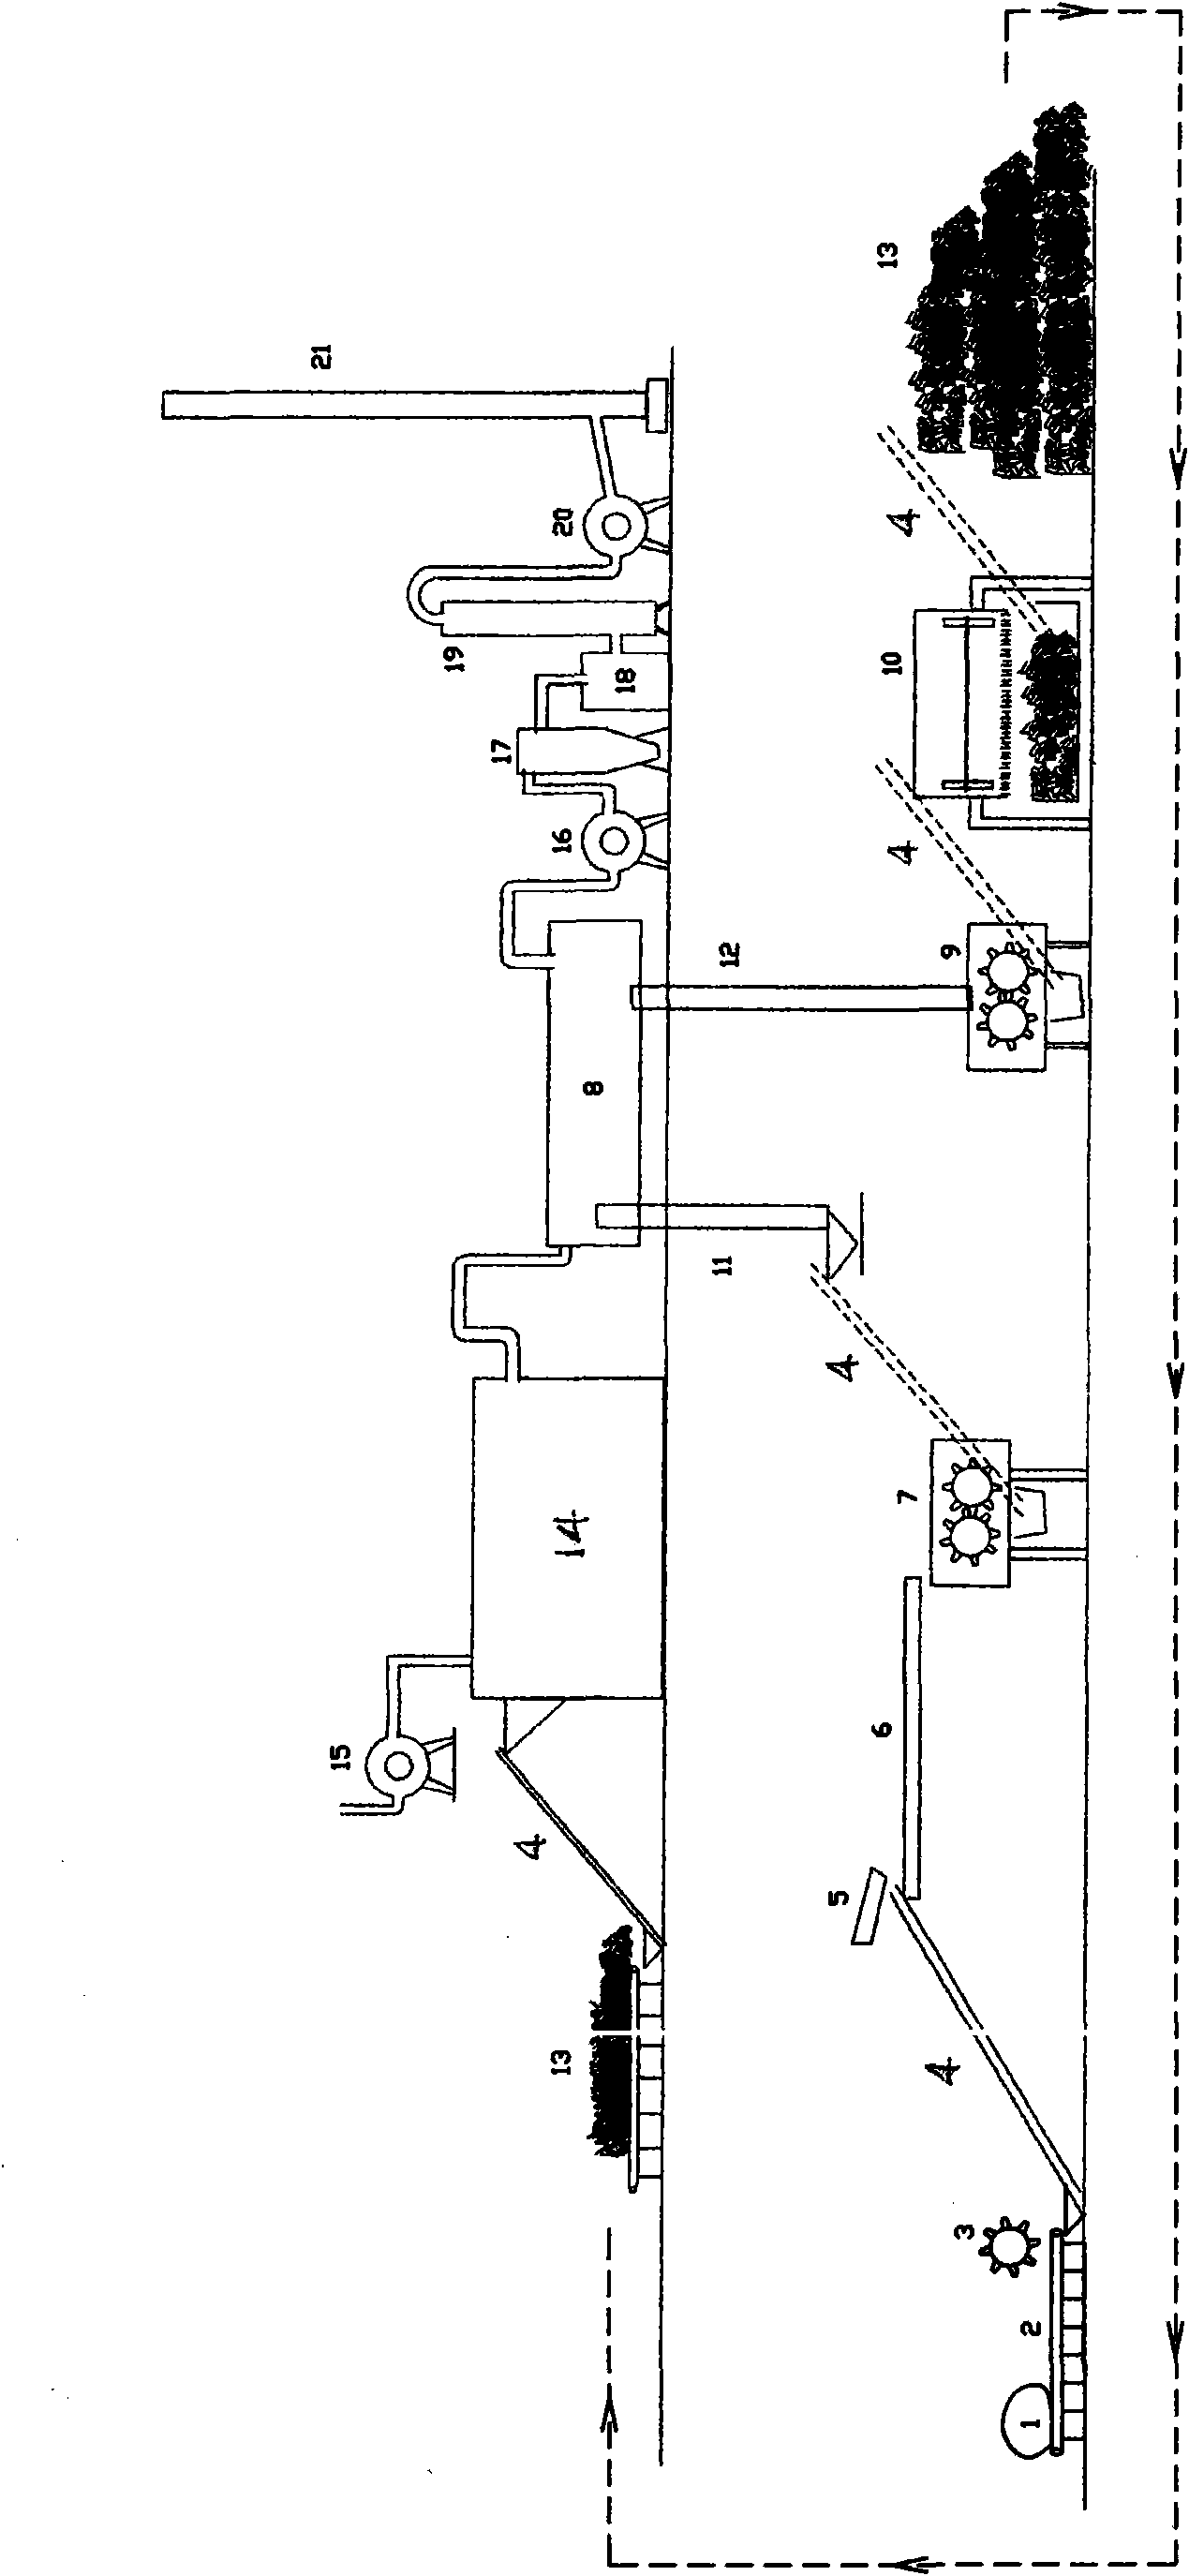 Harmless incineration disposal system and method for disposing domestic refuges